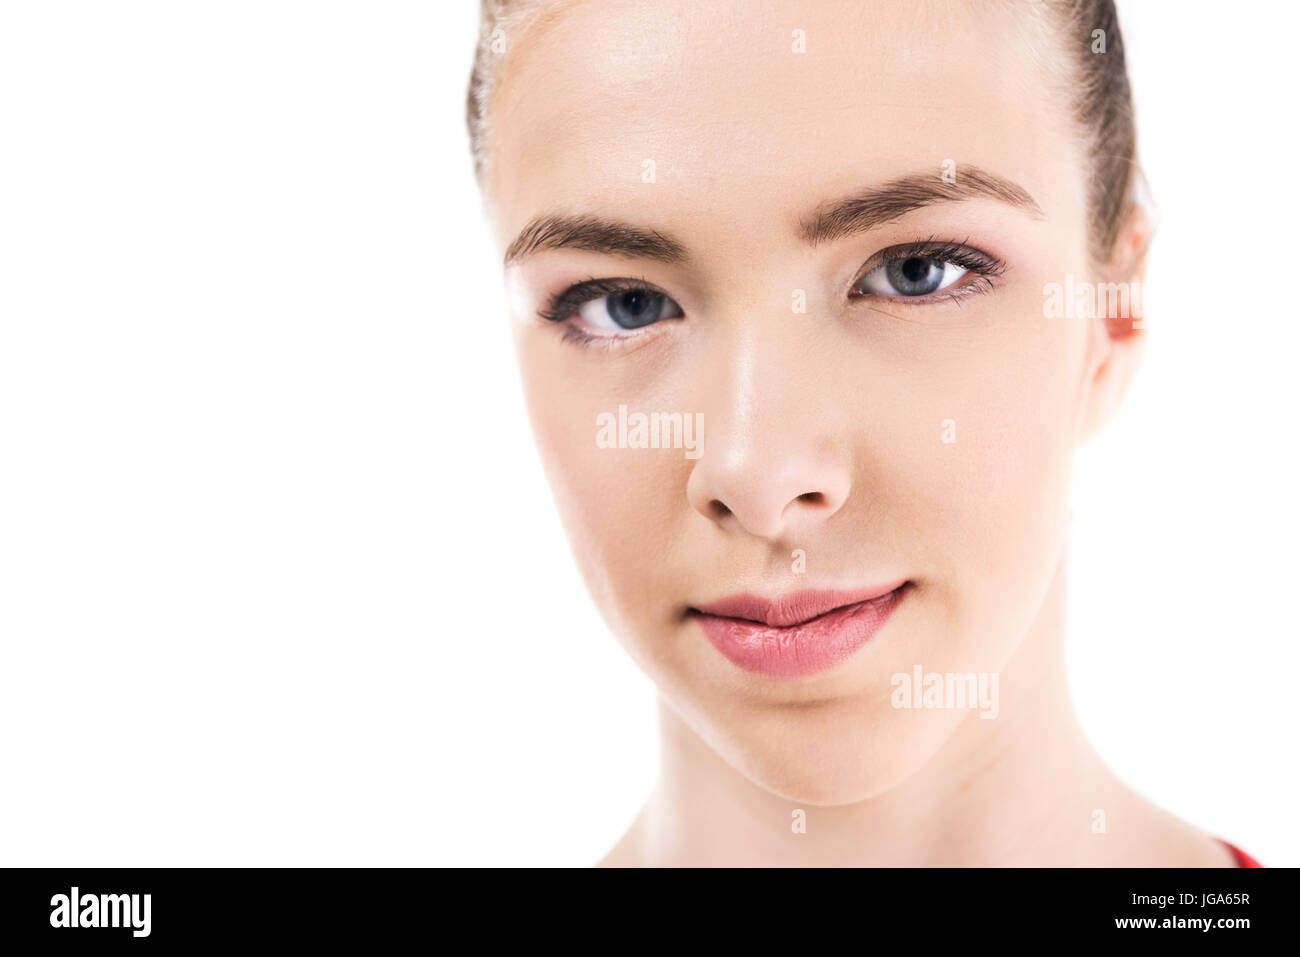 close up portrait of young caucasian woman looking at camera isolated on white Stock Photo